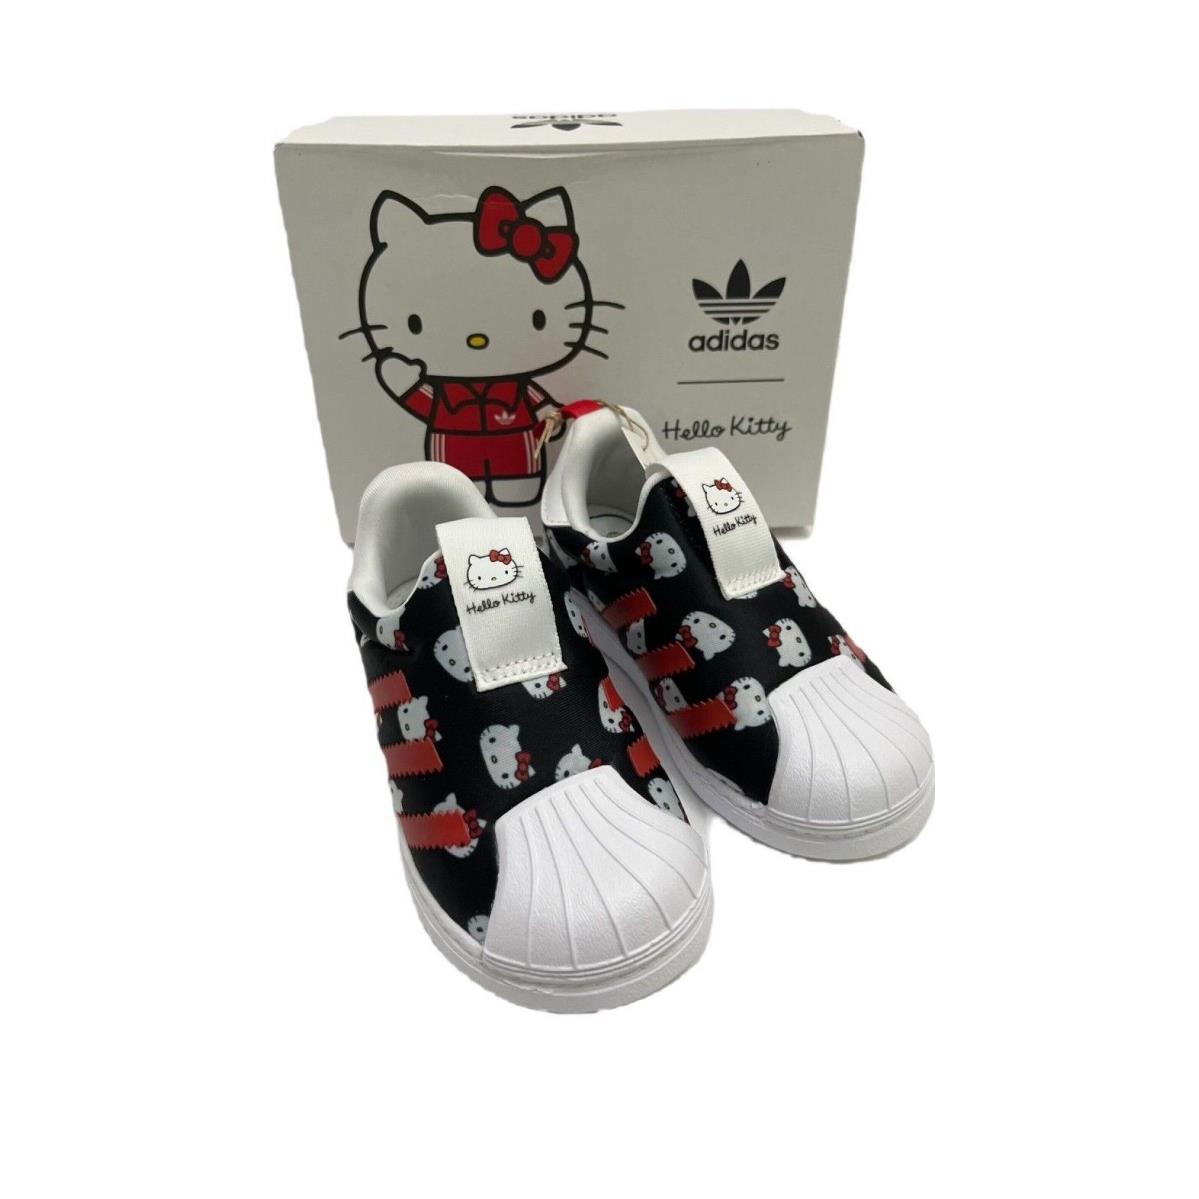 Adidas Hello Kitty Superstar 360 Shoes-toddler GY9214 - Cloud White/Core Black/Vivid Red